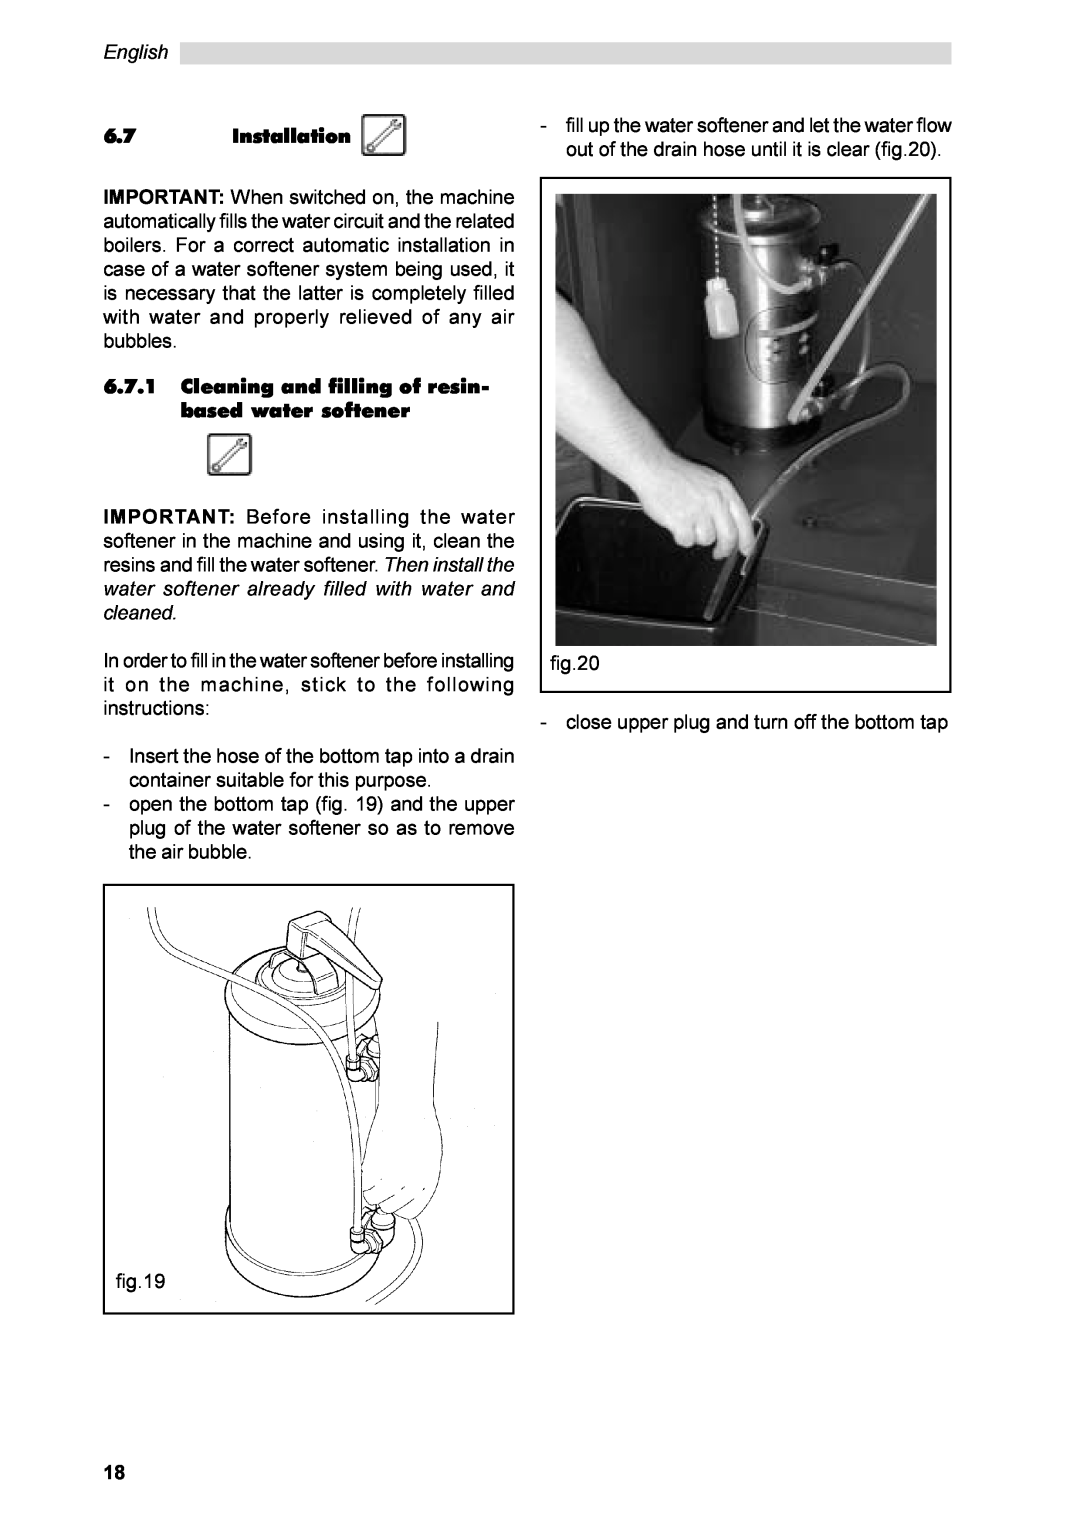 Saeco Coffee Makers SG200E instruction manual English, Installation, Cleaning and filling of resin- based water softener 